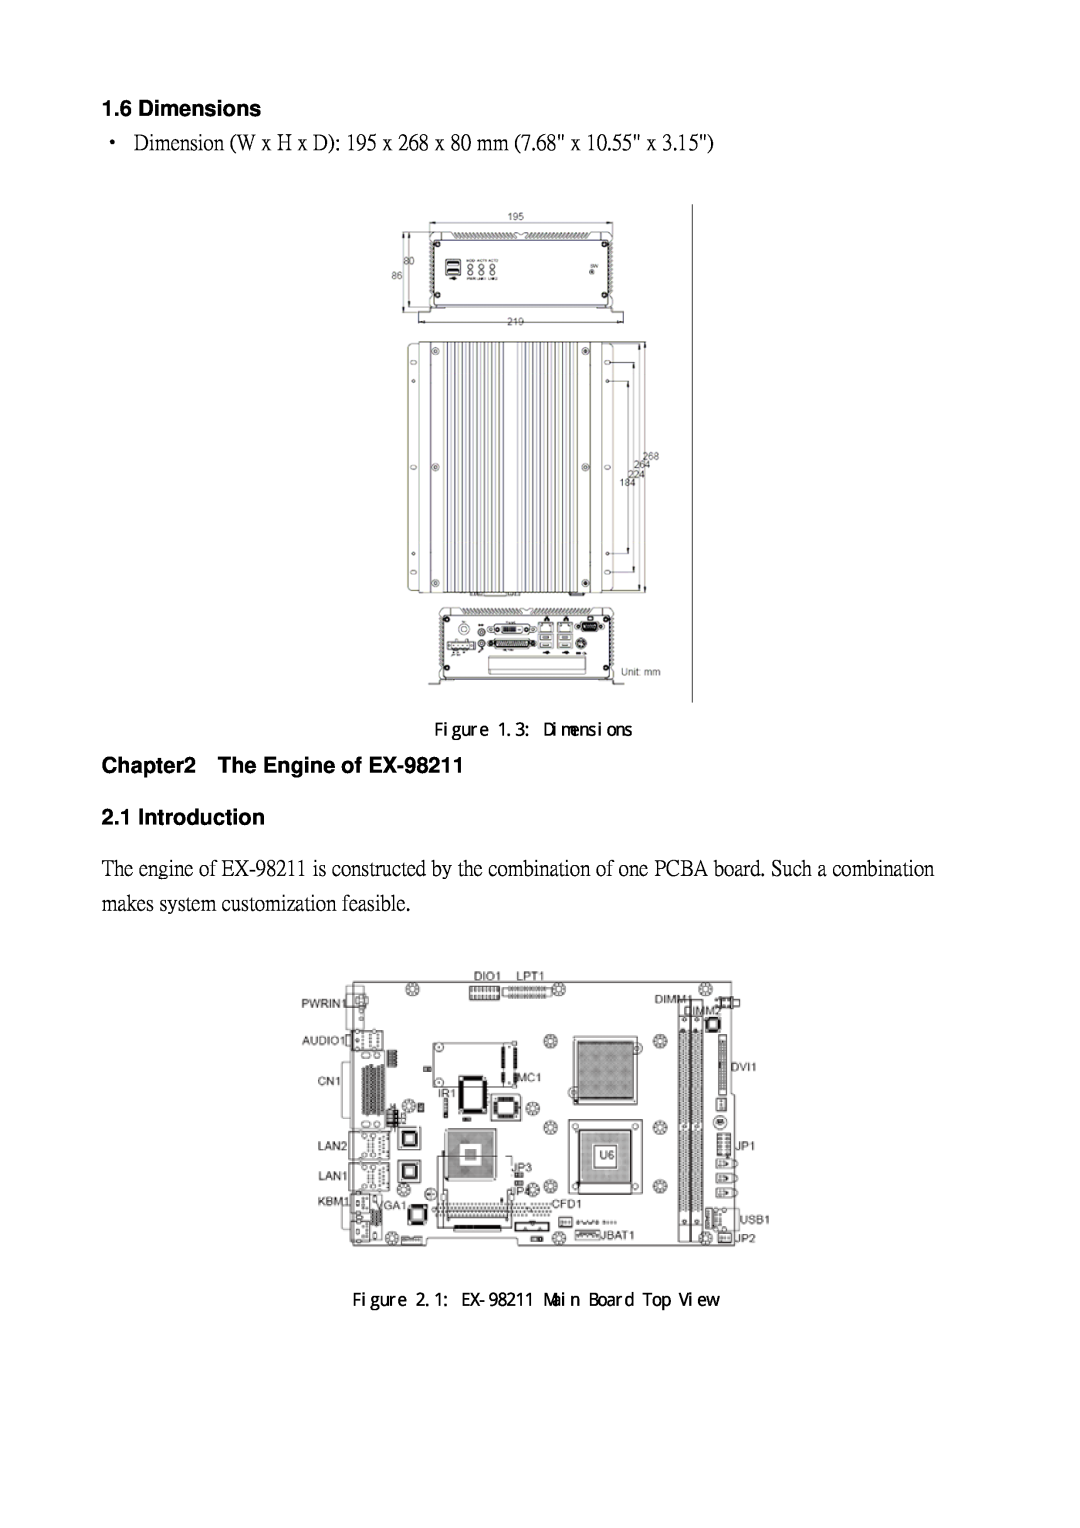 Intel EX-98211 FANLESS CELERON The Engine of EX-98211 2.1 Introduction, 3: Dimensions, 1: EX-98211Main Board Top View 